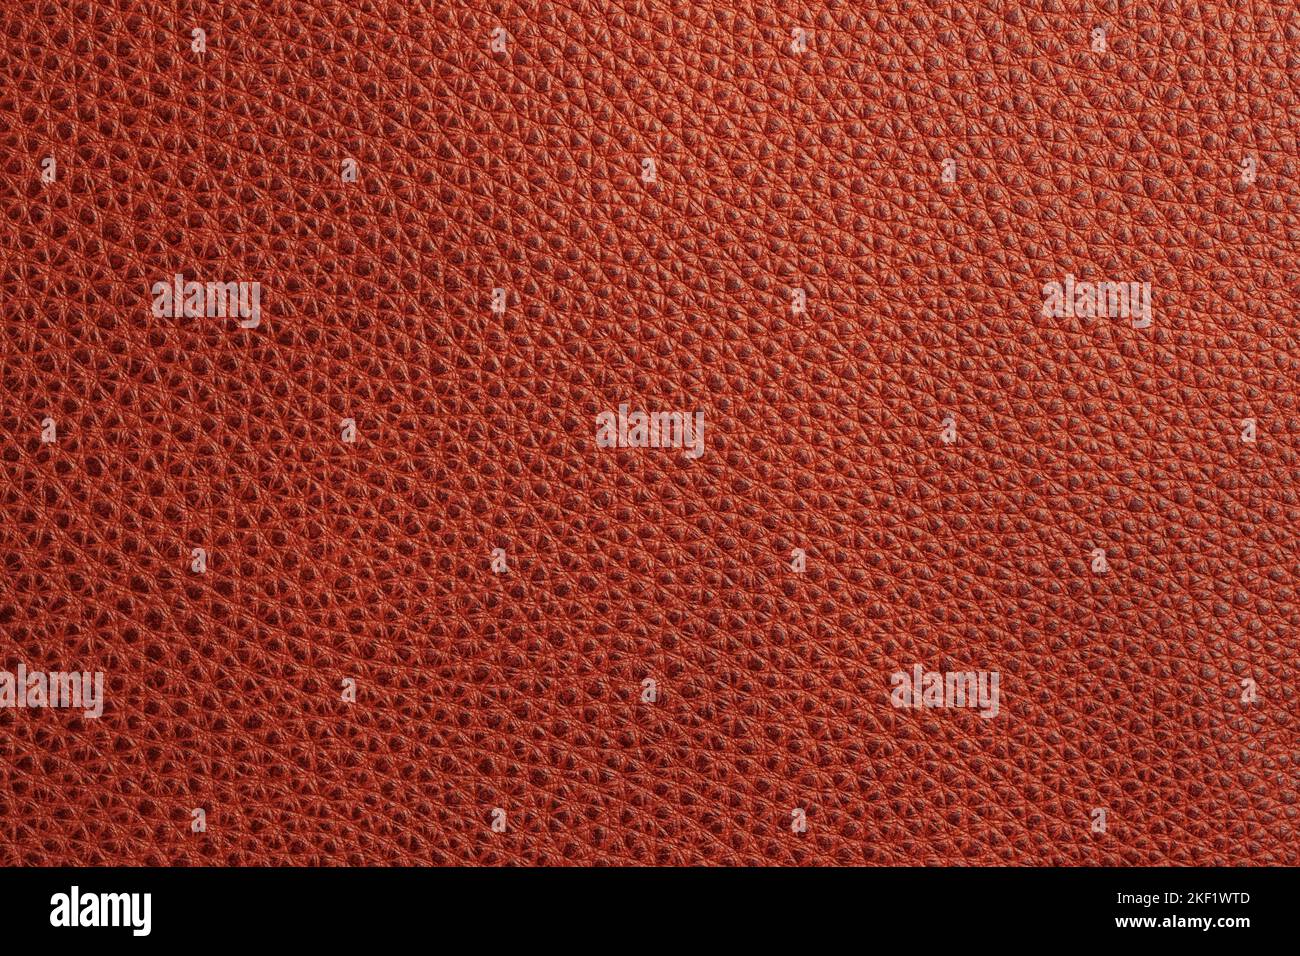 Genuine leather texture closeup, natural background. Manufacturing concept Stock Photo